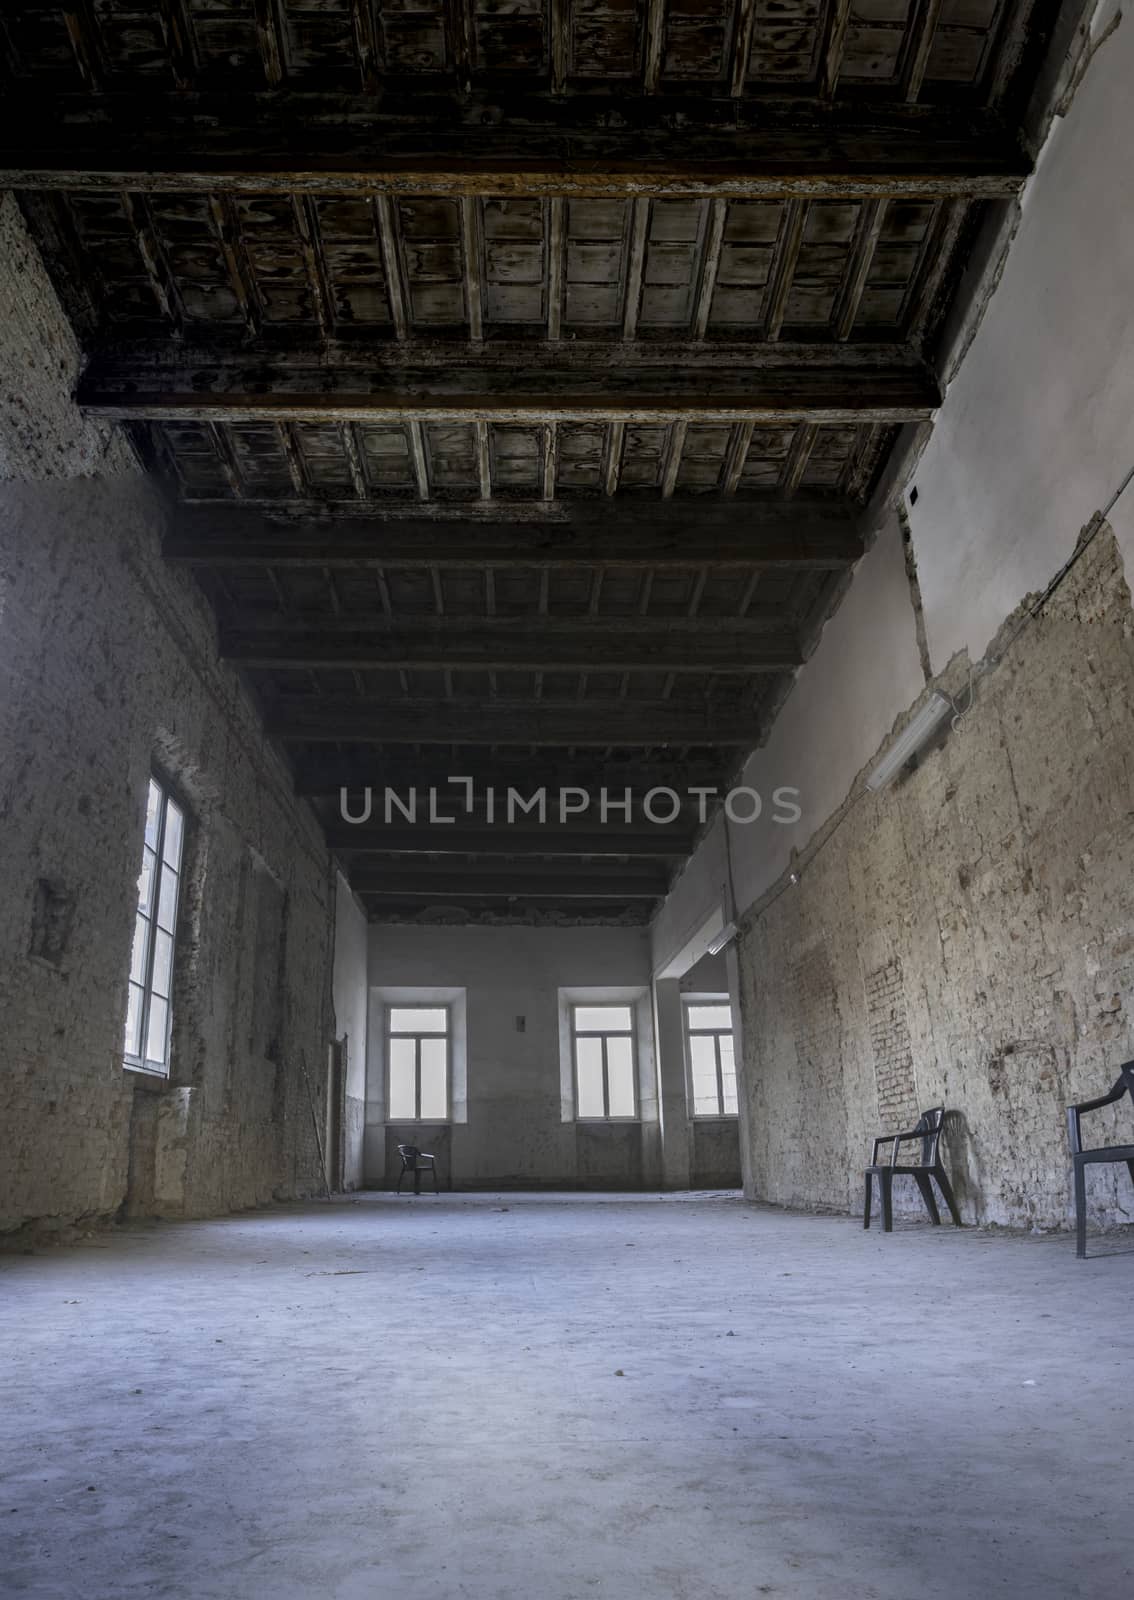 Interiors of an abandoned madhouse in the downtown